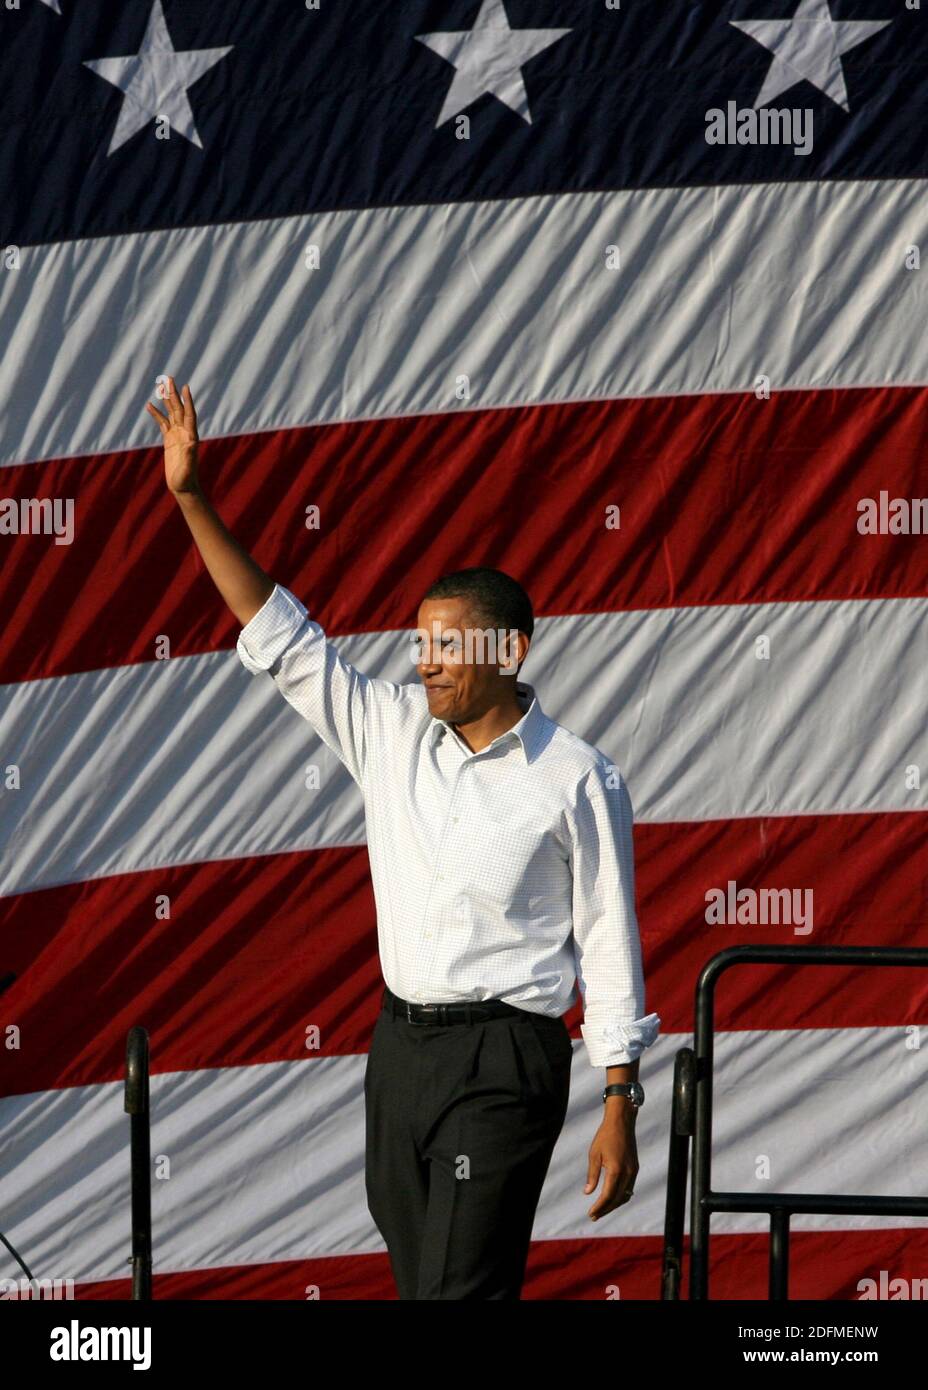 File photo - NO FILM, NO VIDEO, NO TV, NO DOCUMENTARY - President Barack Obama spoke at a rally in Germantown, Pennsylvania, Sunday, October 10, 2010. Former President Barack Obama’s upcoming memoir “A Promised Land” will be released November 17 in hardcover, digital and audiobook formats. Photo by Sarah J. Glover/Philadelphia Inquirer/MCT/ABACAPRESS.COM Stock Photo